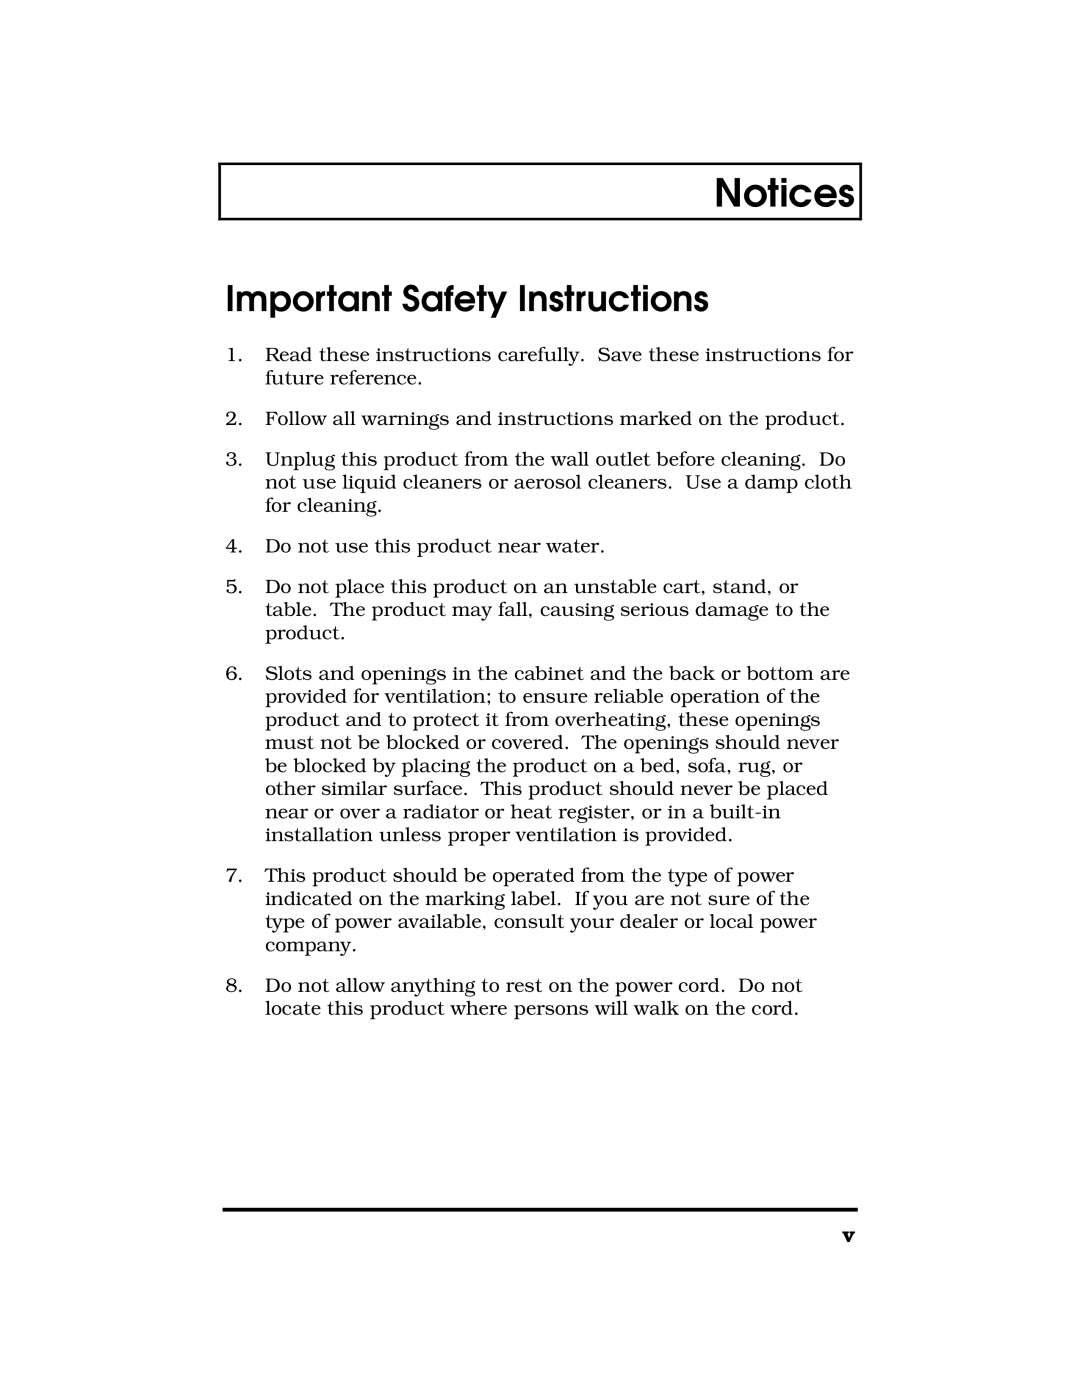 Acer 390 Series manual Important Safety Instructions, Notices 